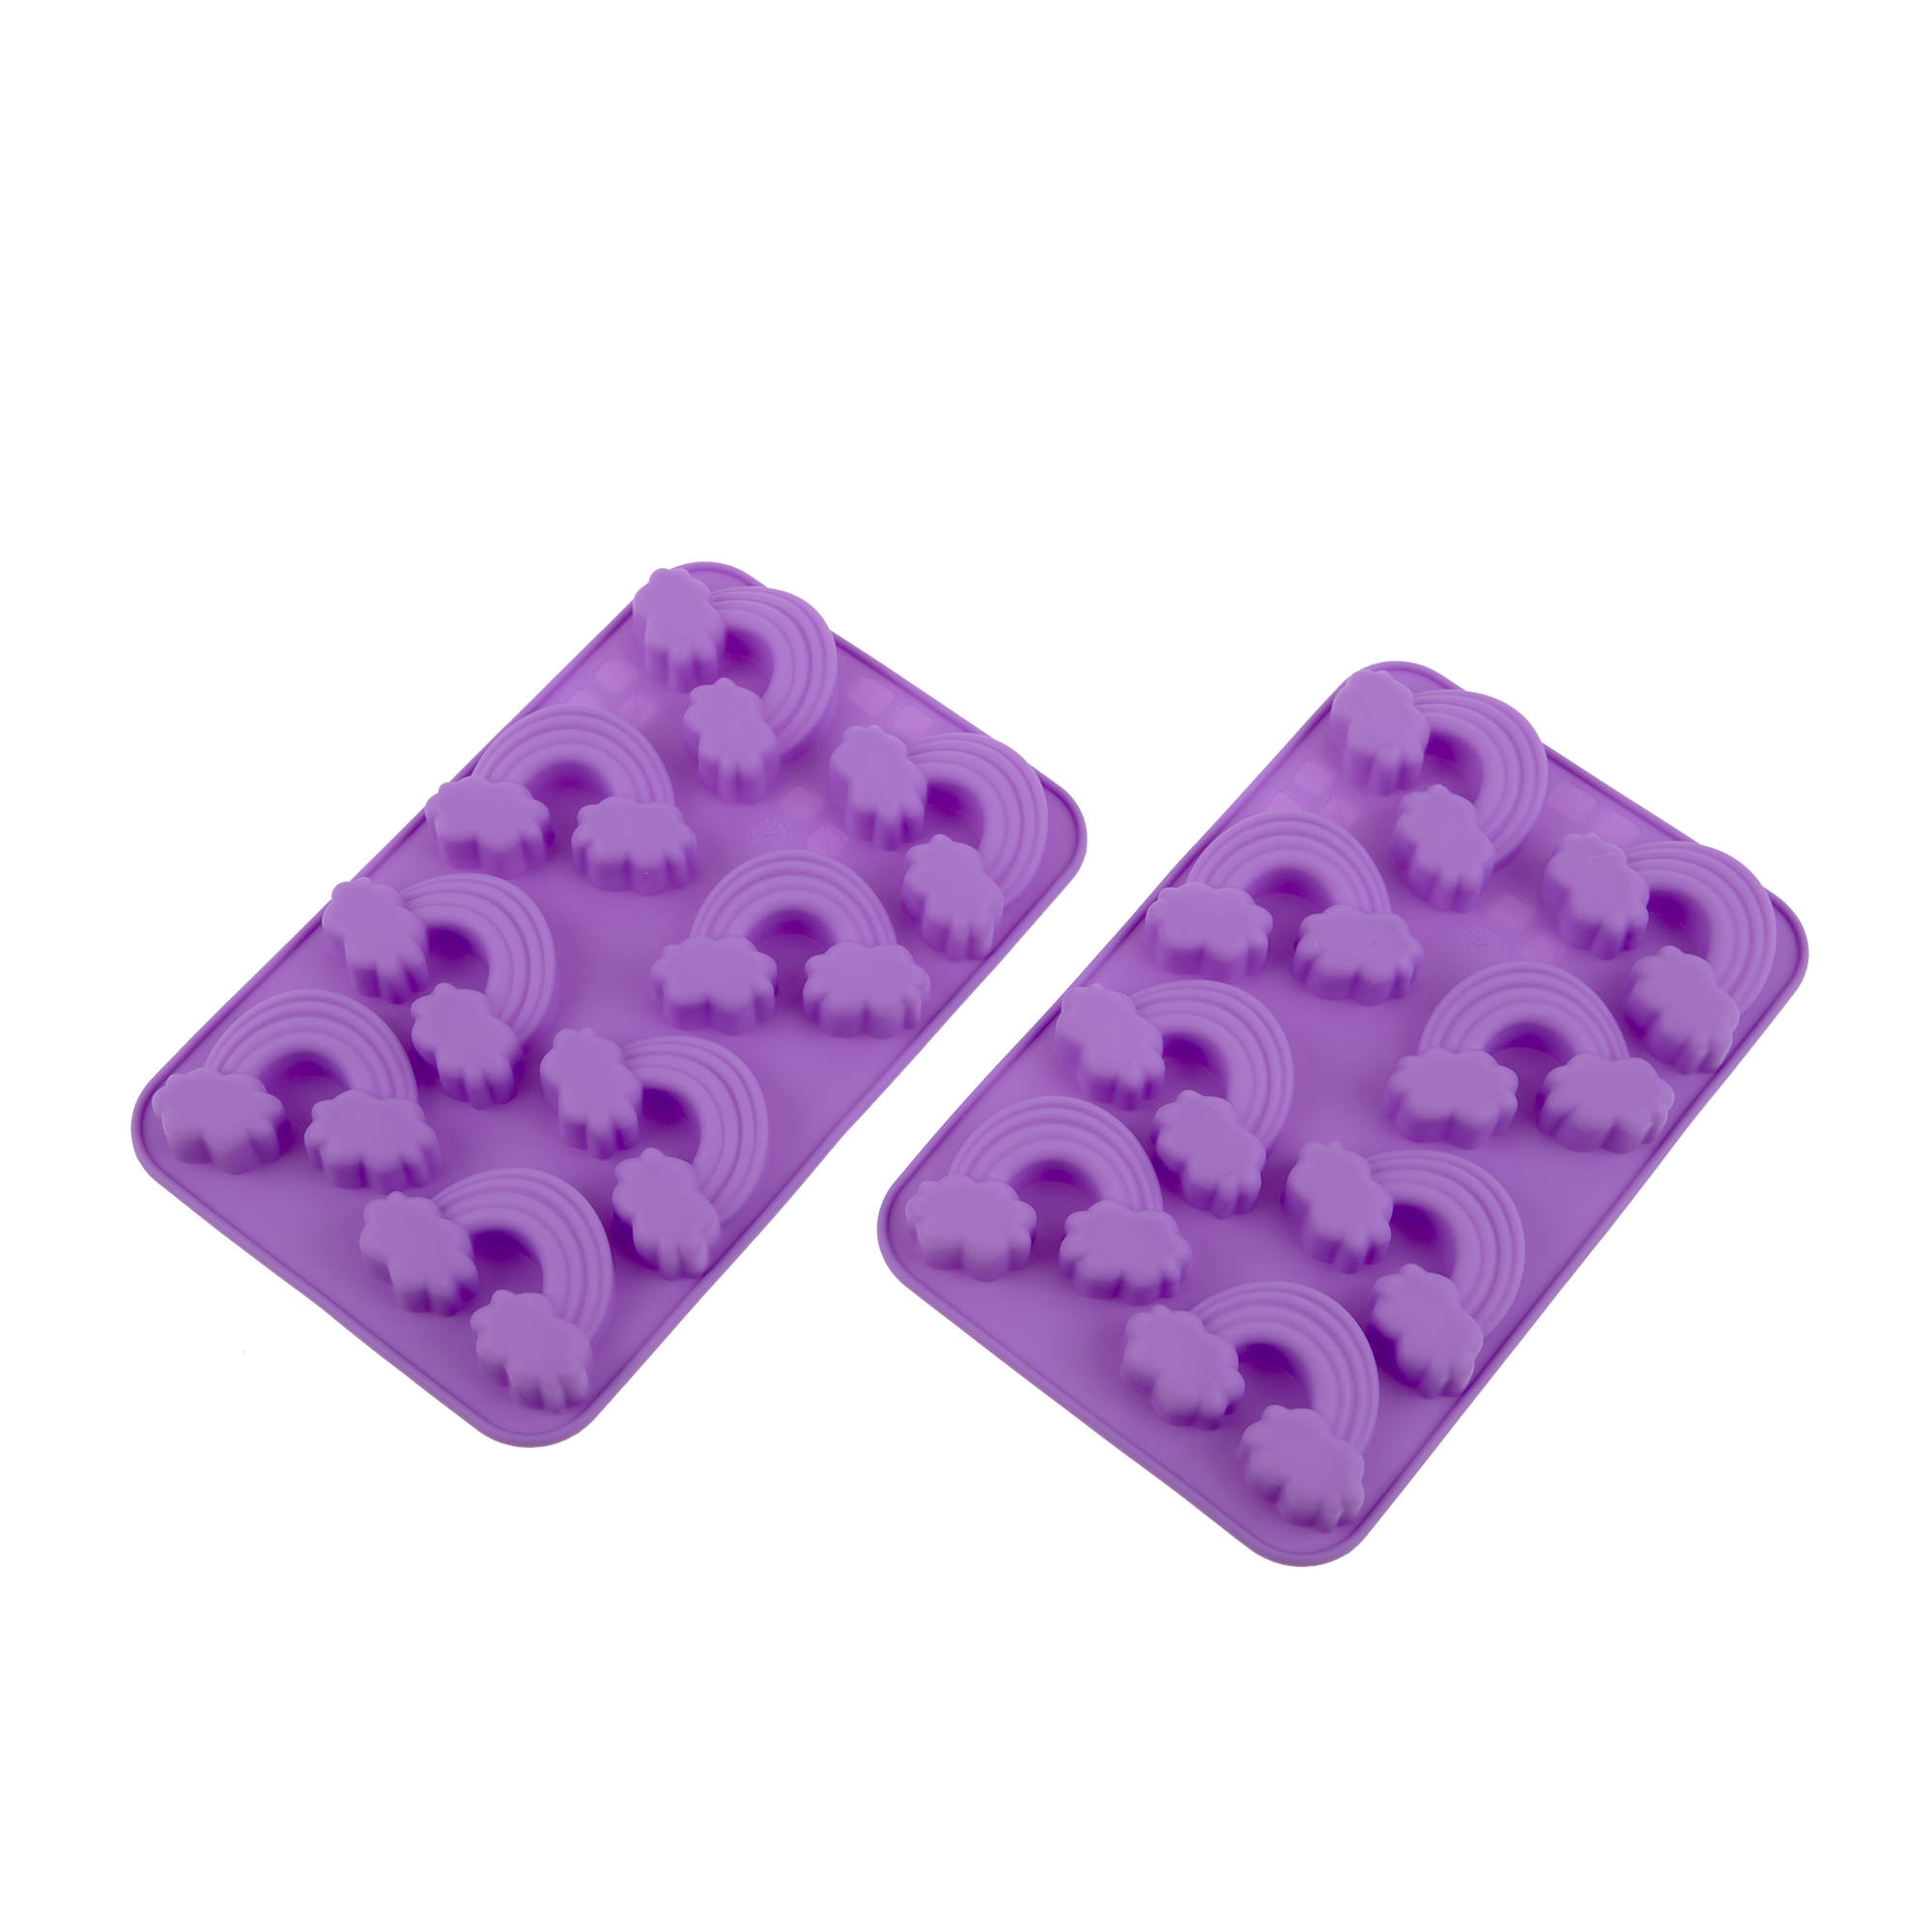 Daily Bake Rainbow Chocolate Mould 8 Cup Set 2pc Purple Image 1